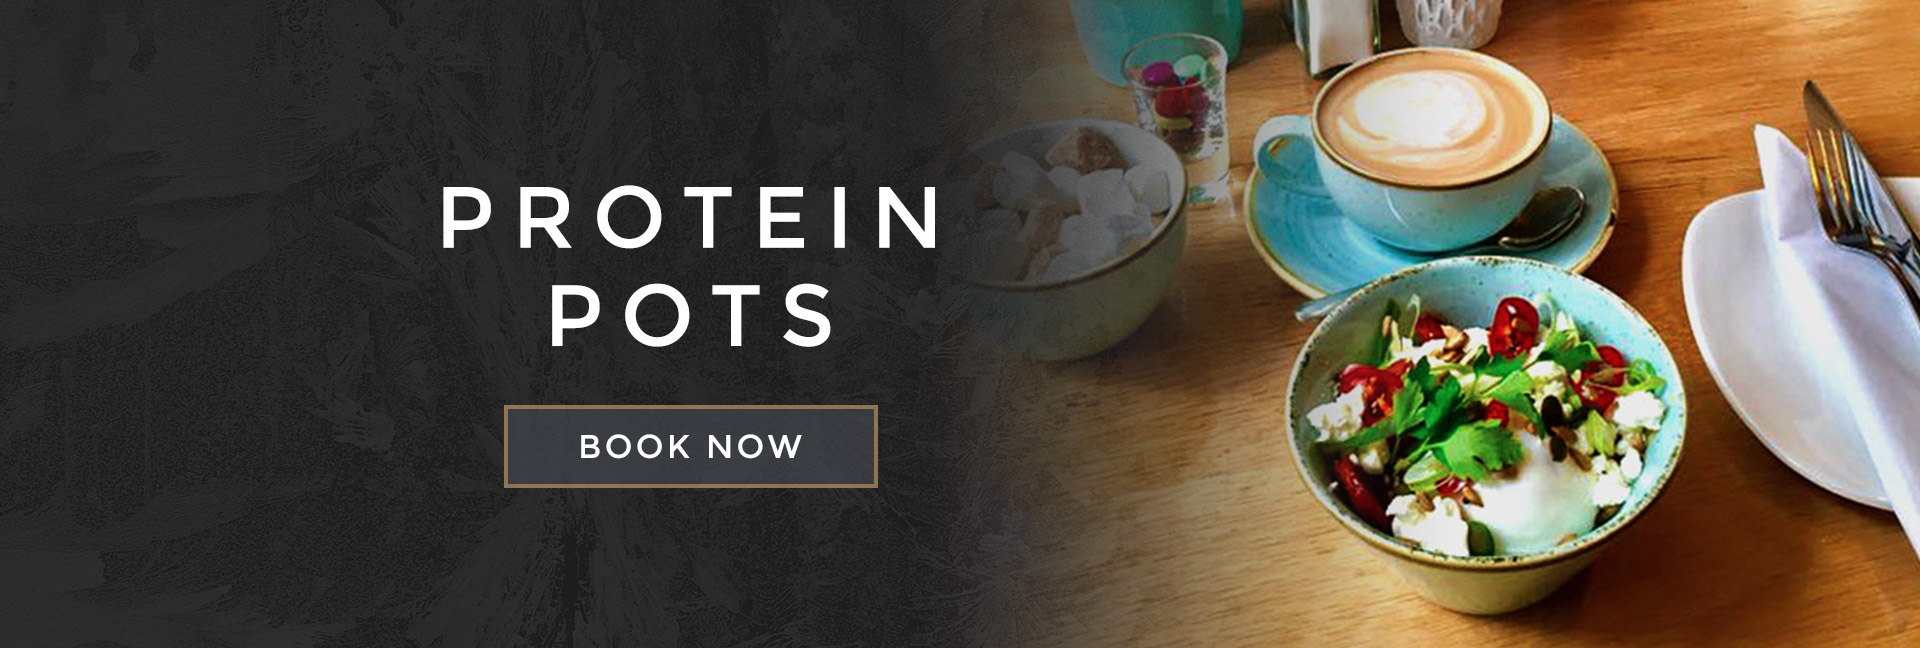 Protein pots at All Bar One Trafford Centre - Book your table